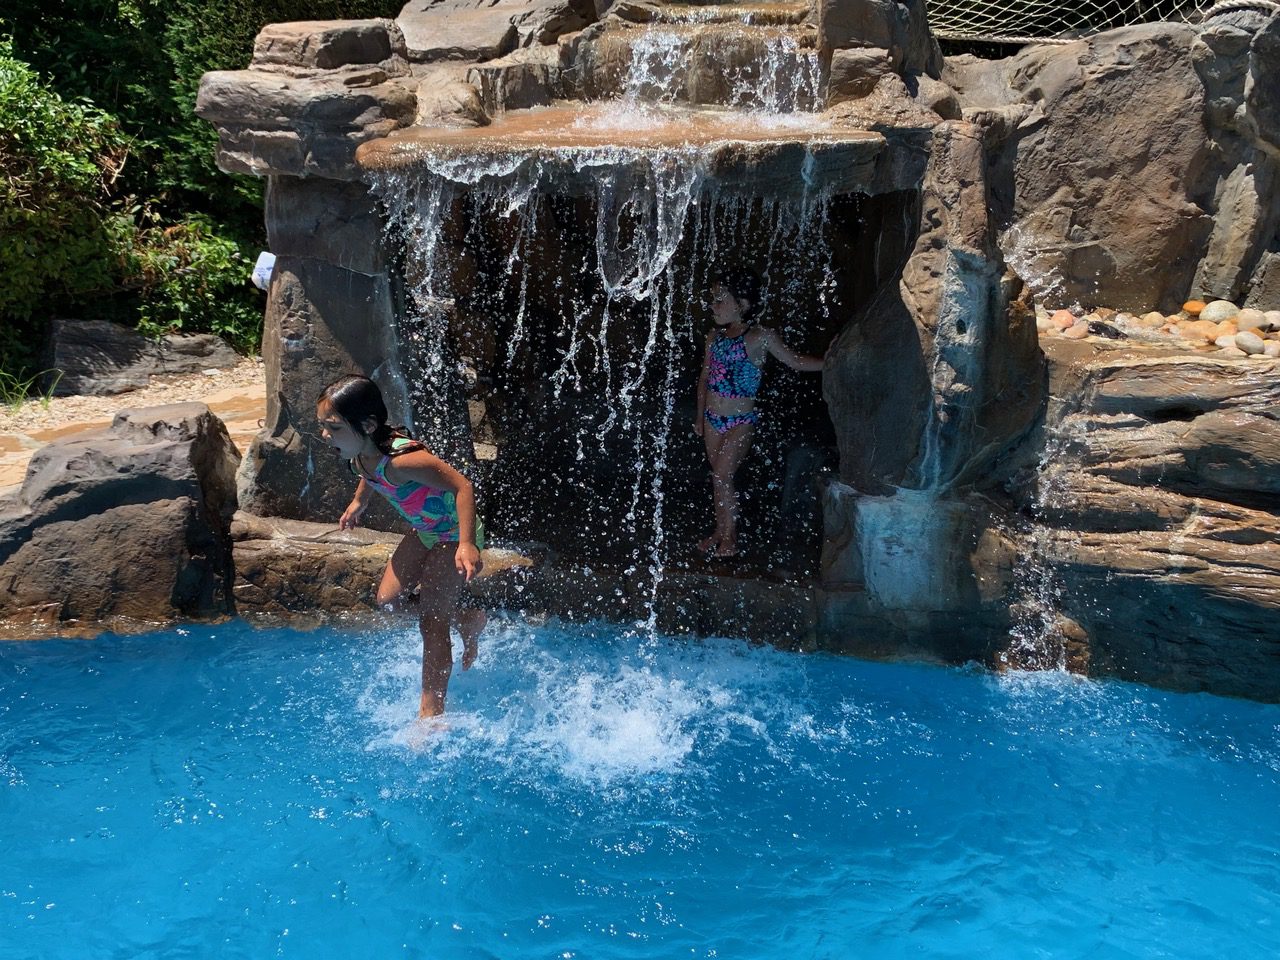 Two people jumping in a pool with water falling from the top of a waterfall.